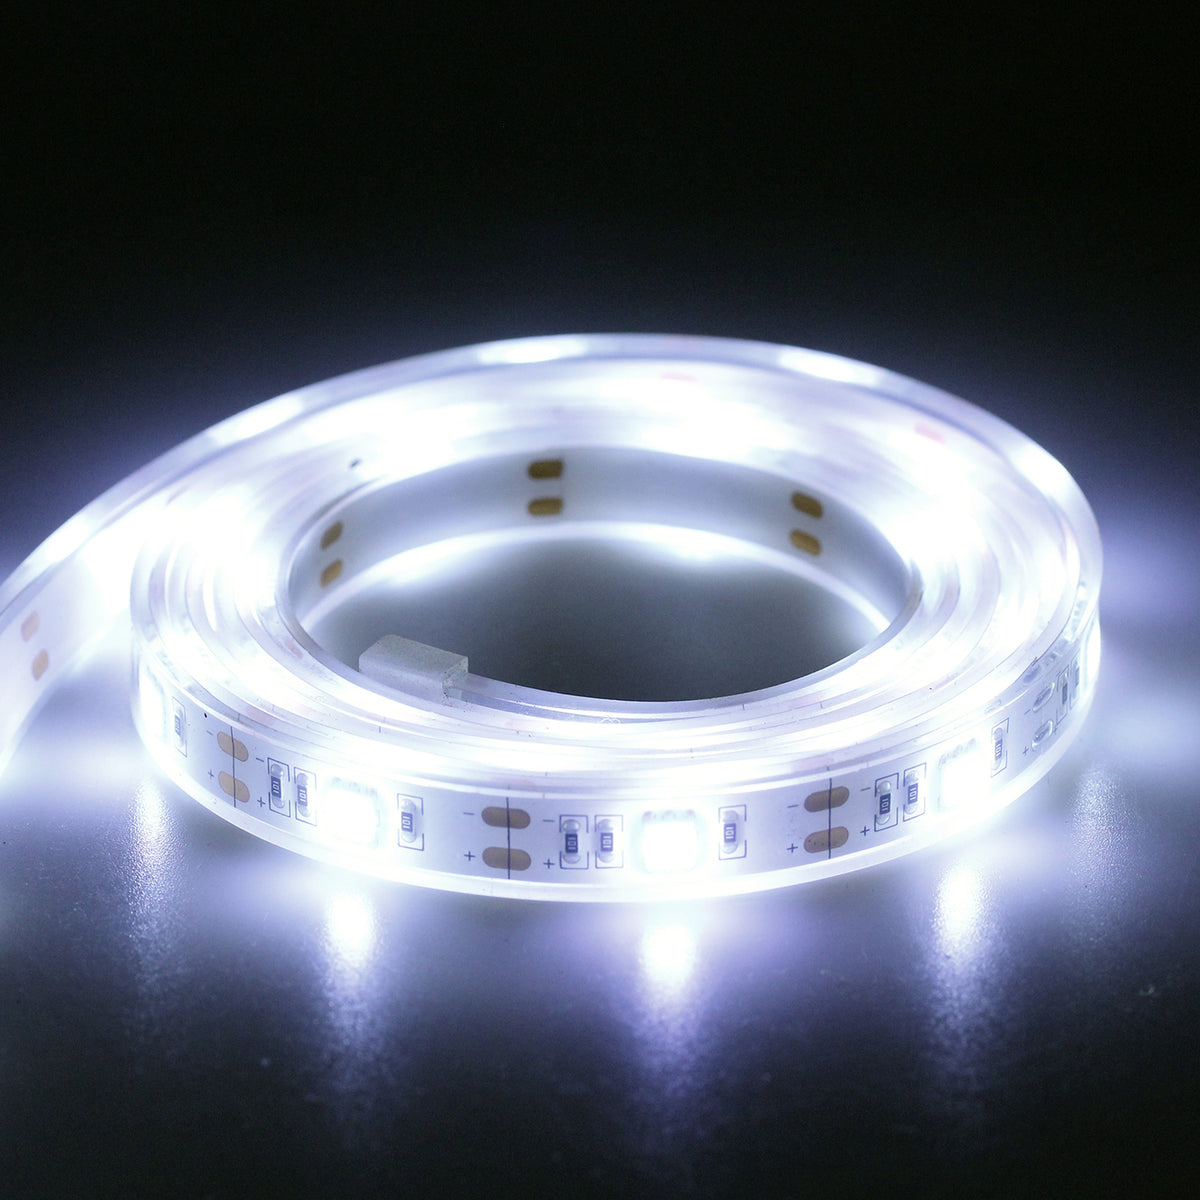 FashionLite USB LED Rope Lights Strip Water-Resistant Dustproof (Cool White, 5-7')